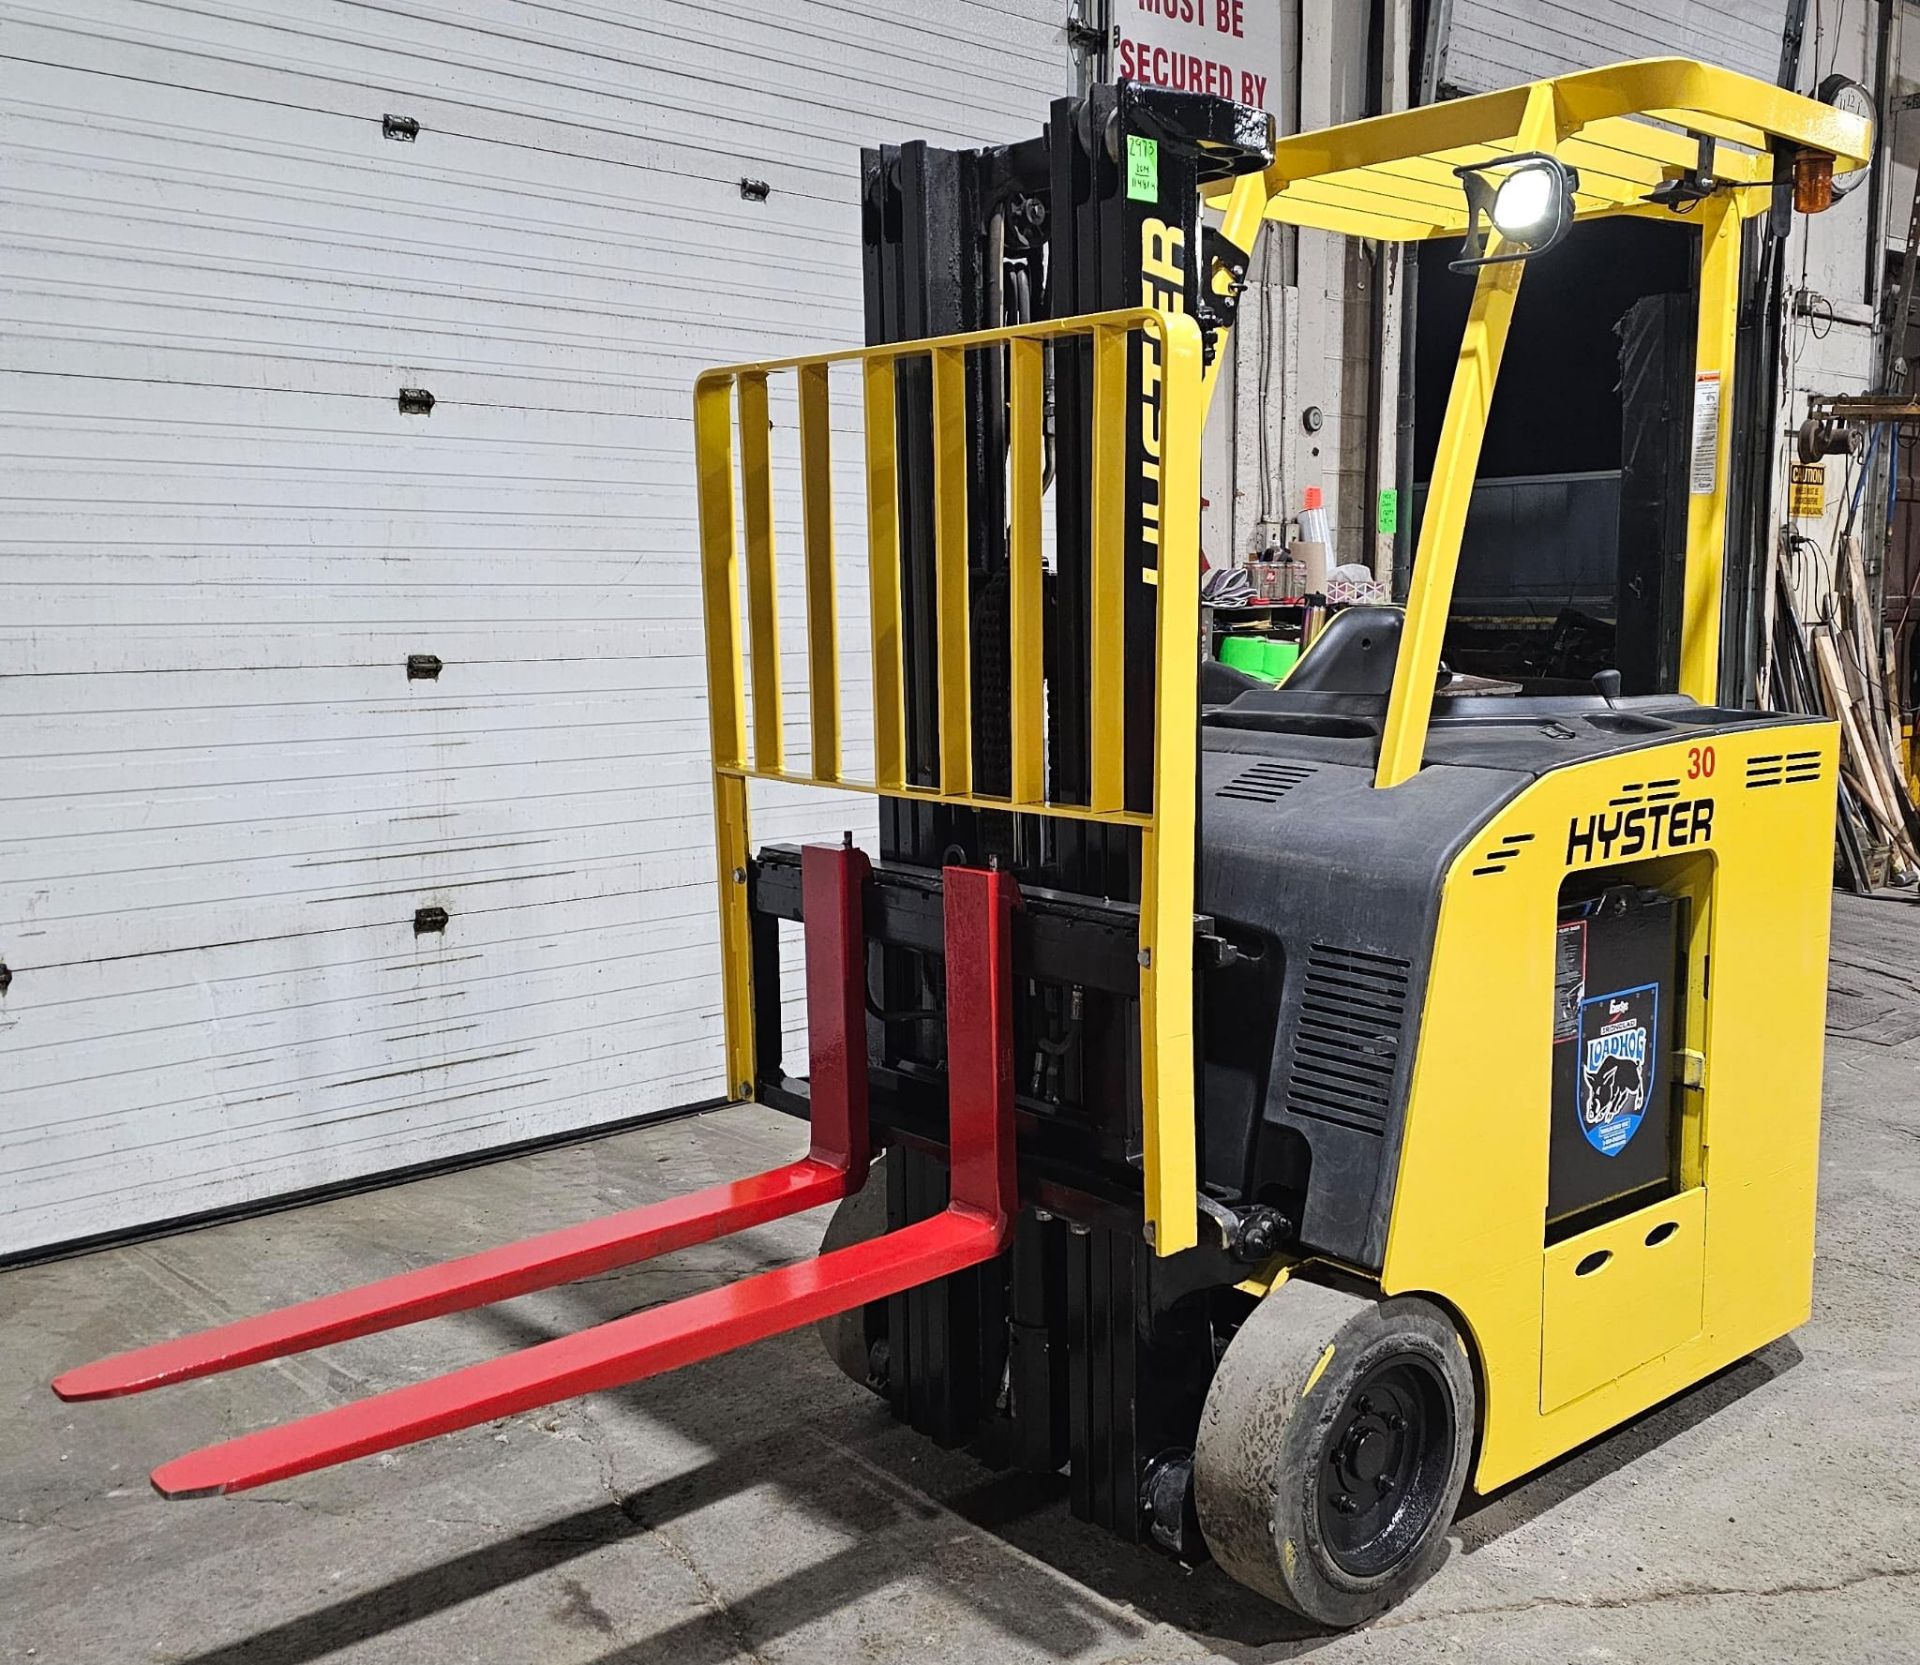 2014 Hyster 3,000lbs Capacity Stand-On Forklif 36V Battery 3-Stage Mast 187" load height , Sideshift - Image 3 of 5